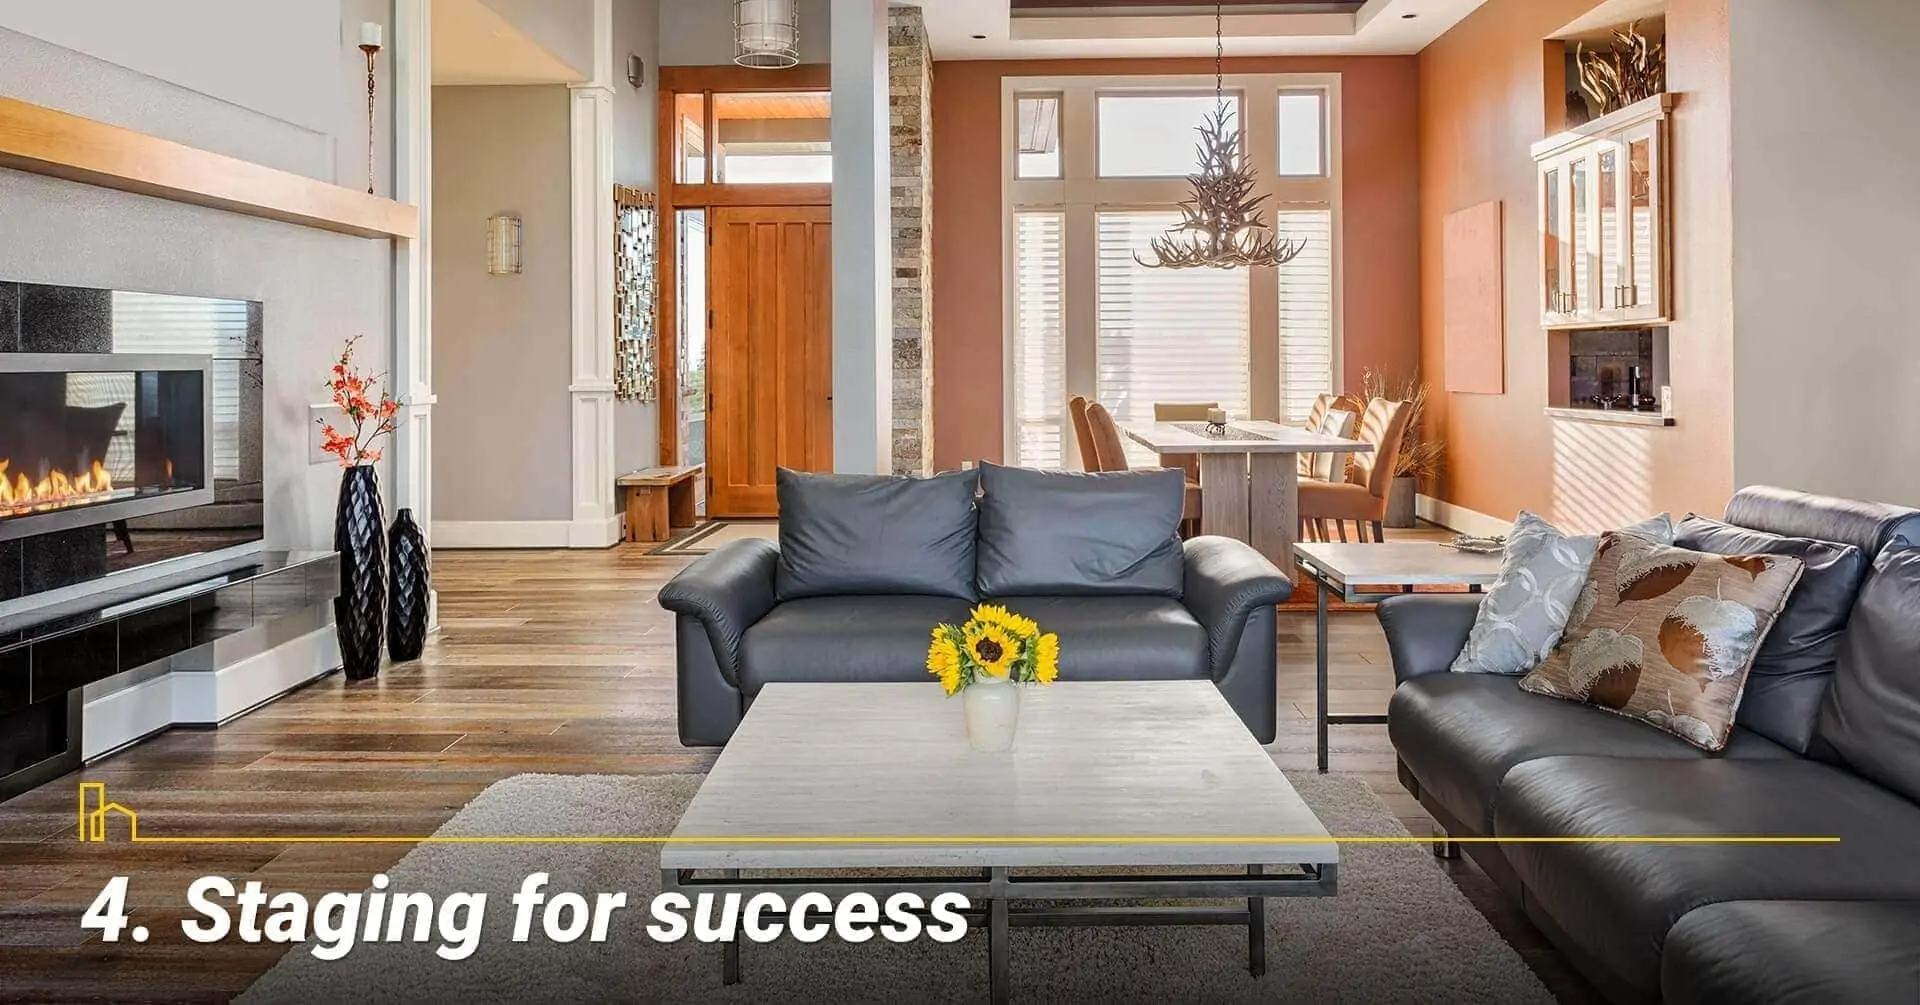 Staging for success, let the professional stager do the job